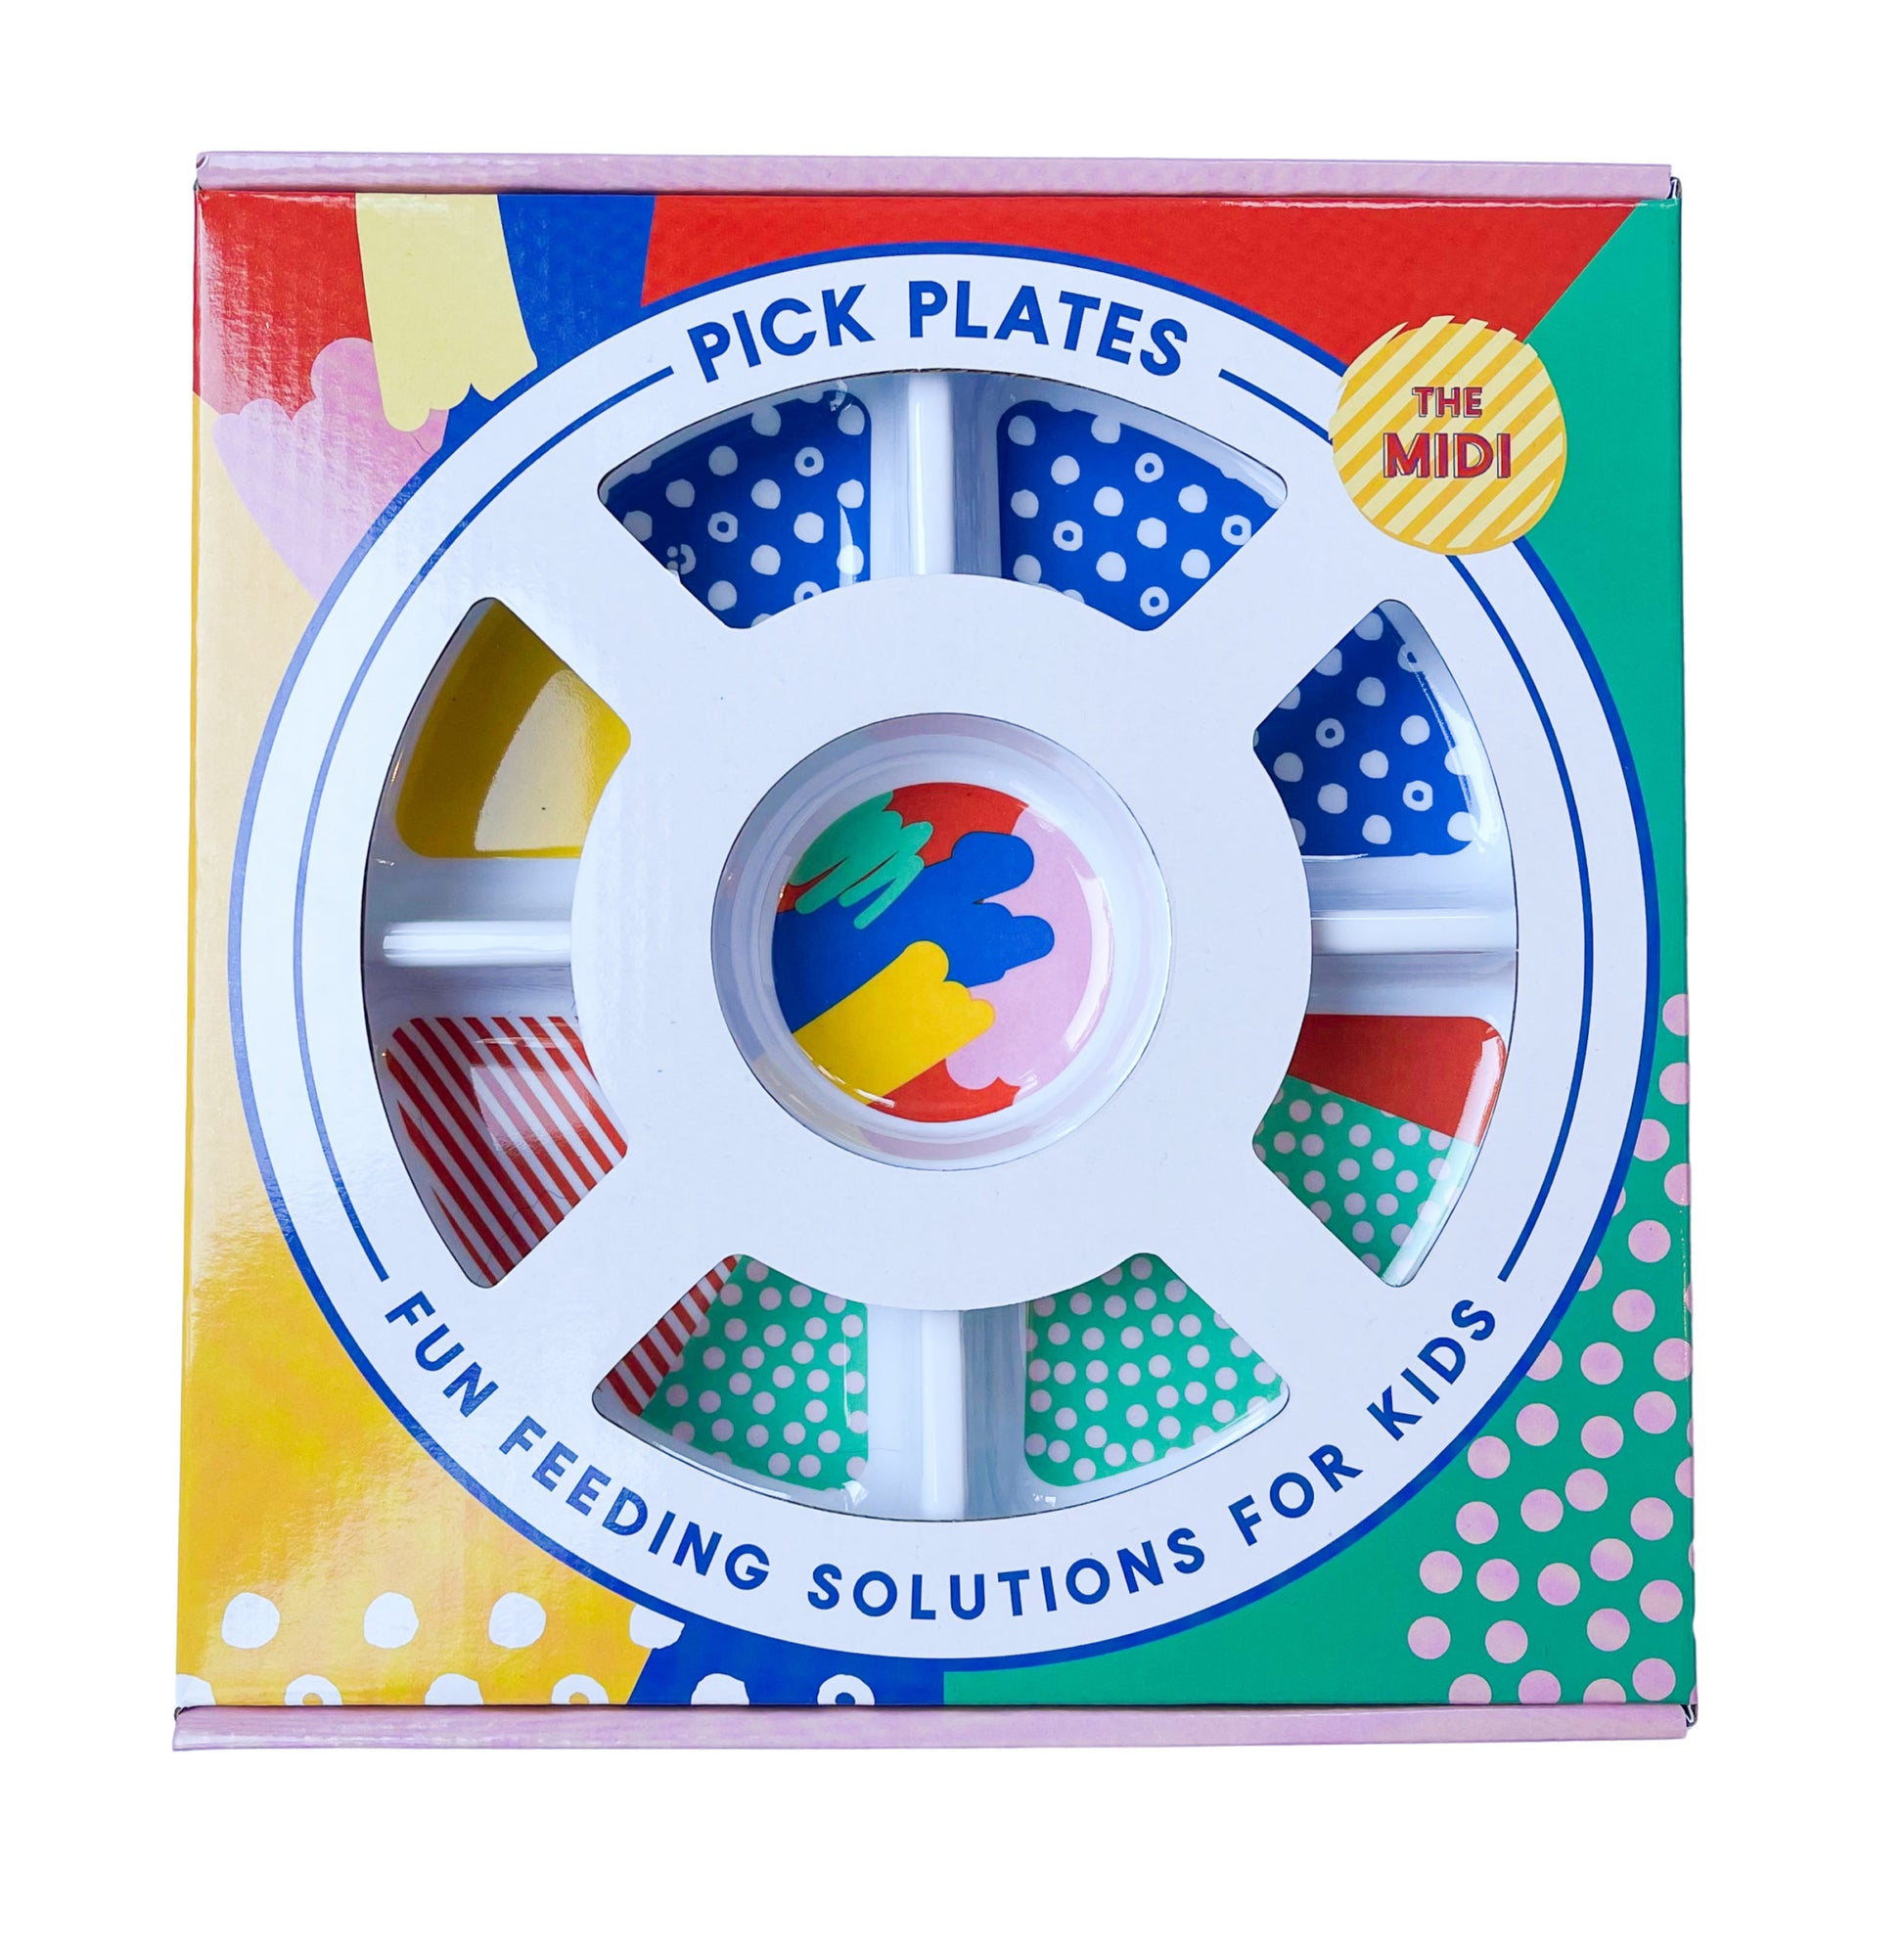 The front view of the Pick Plate Midi in it’s colourful packaging as viewed from the front showing the divided sections of the plate.